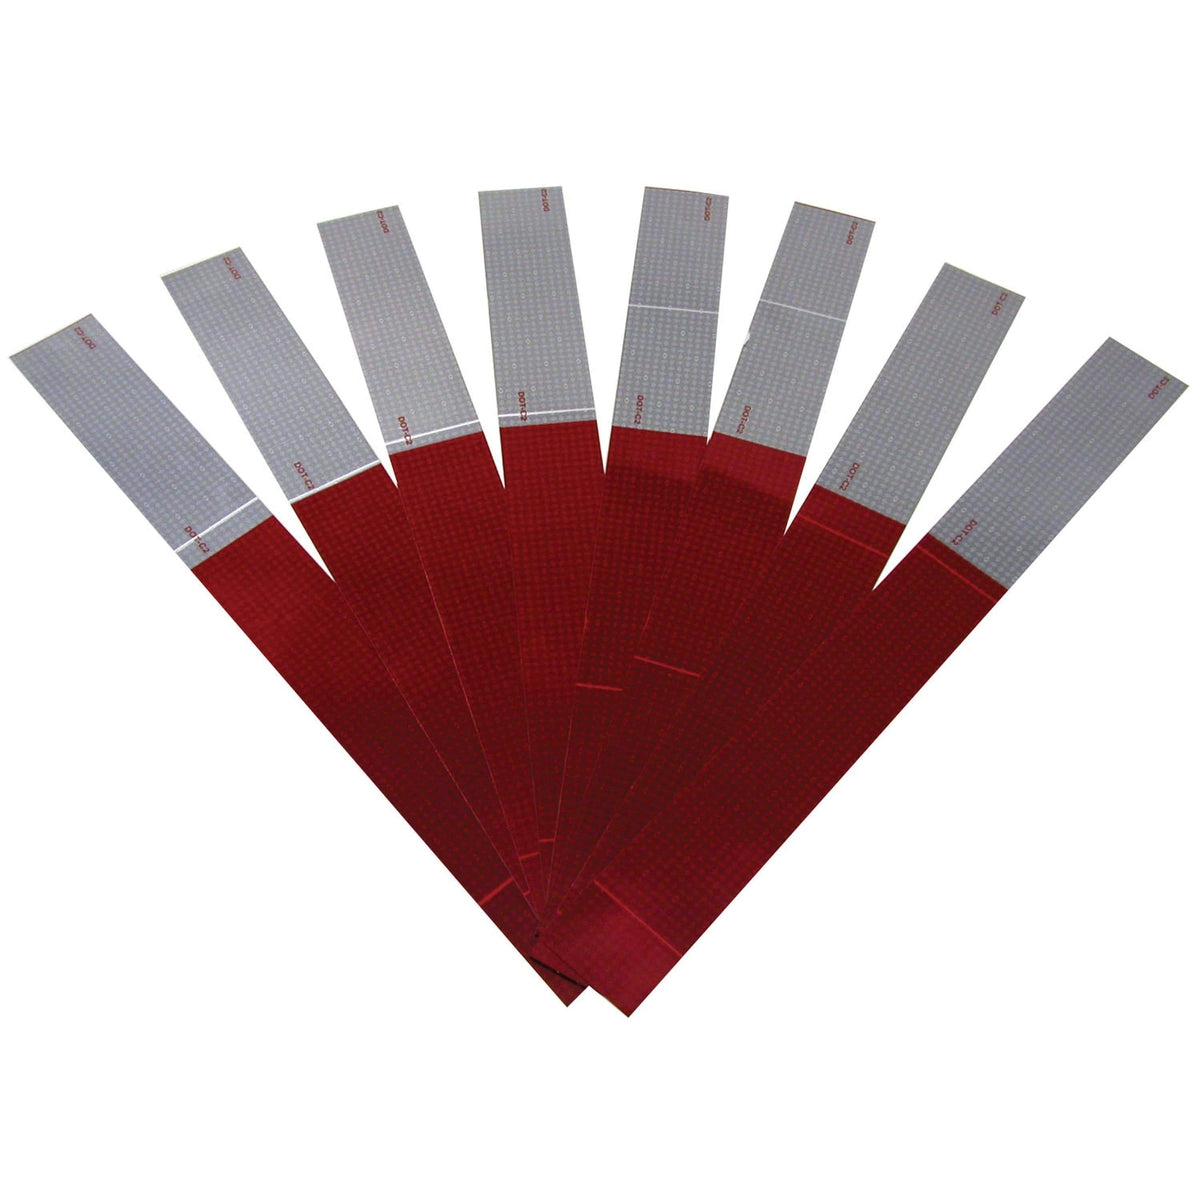 Anderson Marine Qualifies for Free Shipping Anderson Reflective Marking Tape Strip 2" Red/White 8-Strip Kit #465K